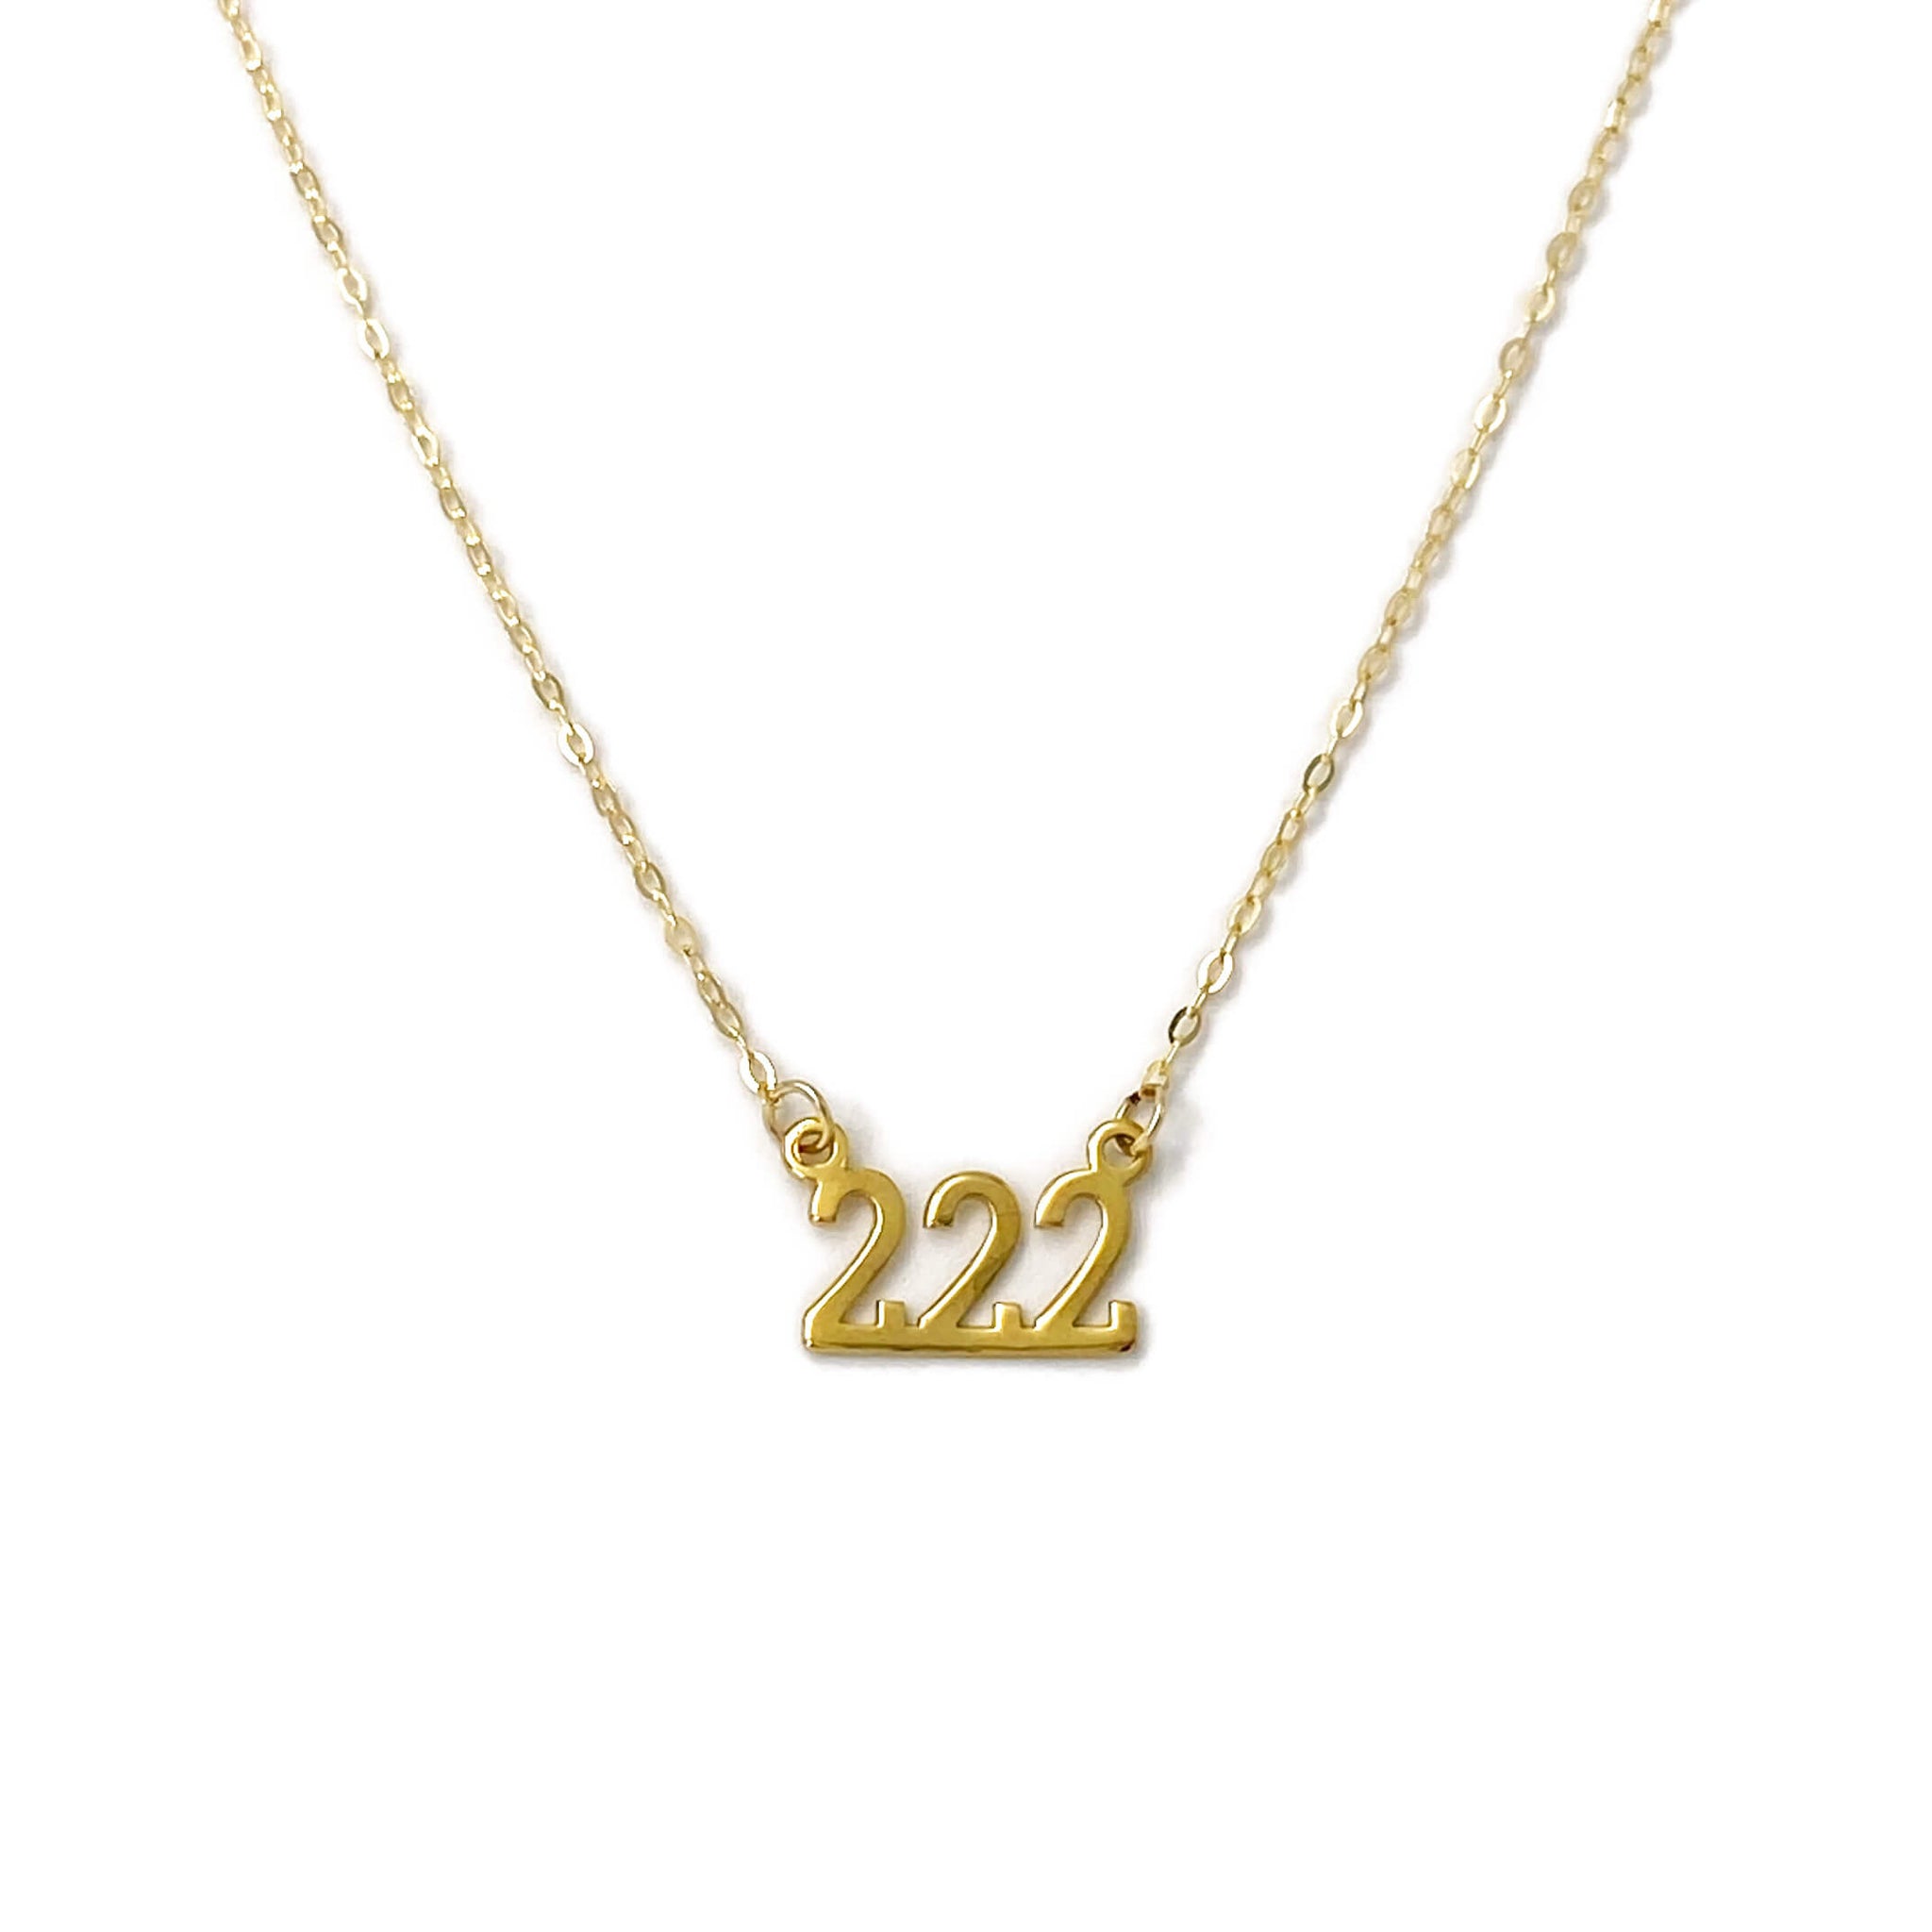 this is a 222 angel number necklace that can be made in 14k solid gold or gold filled material.  